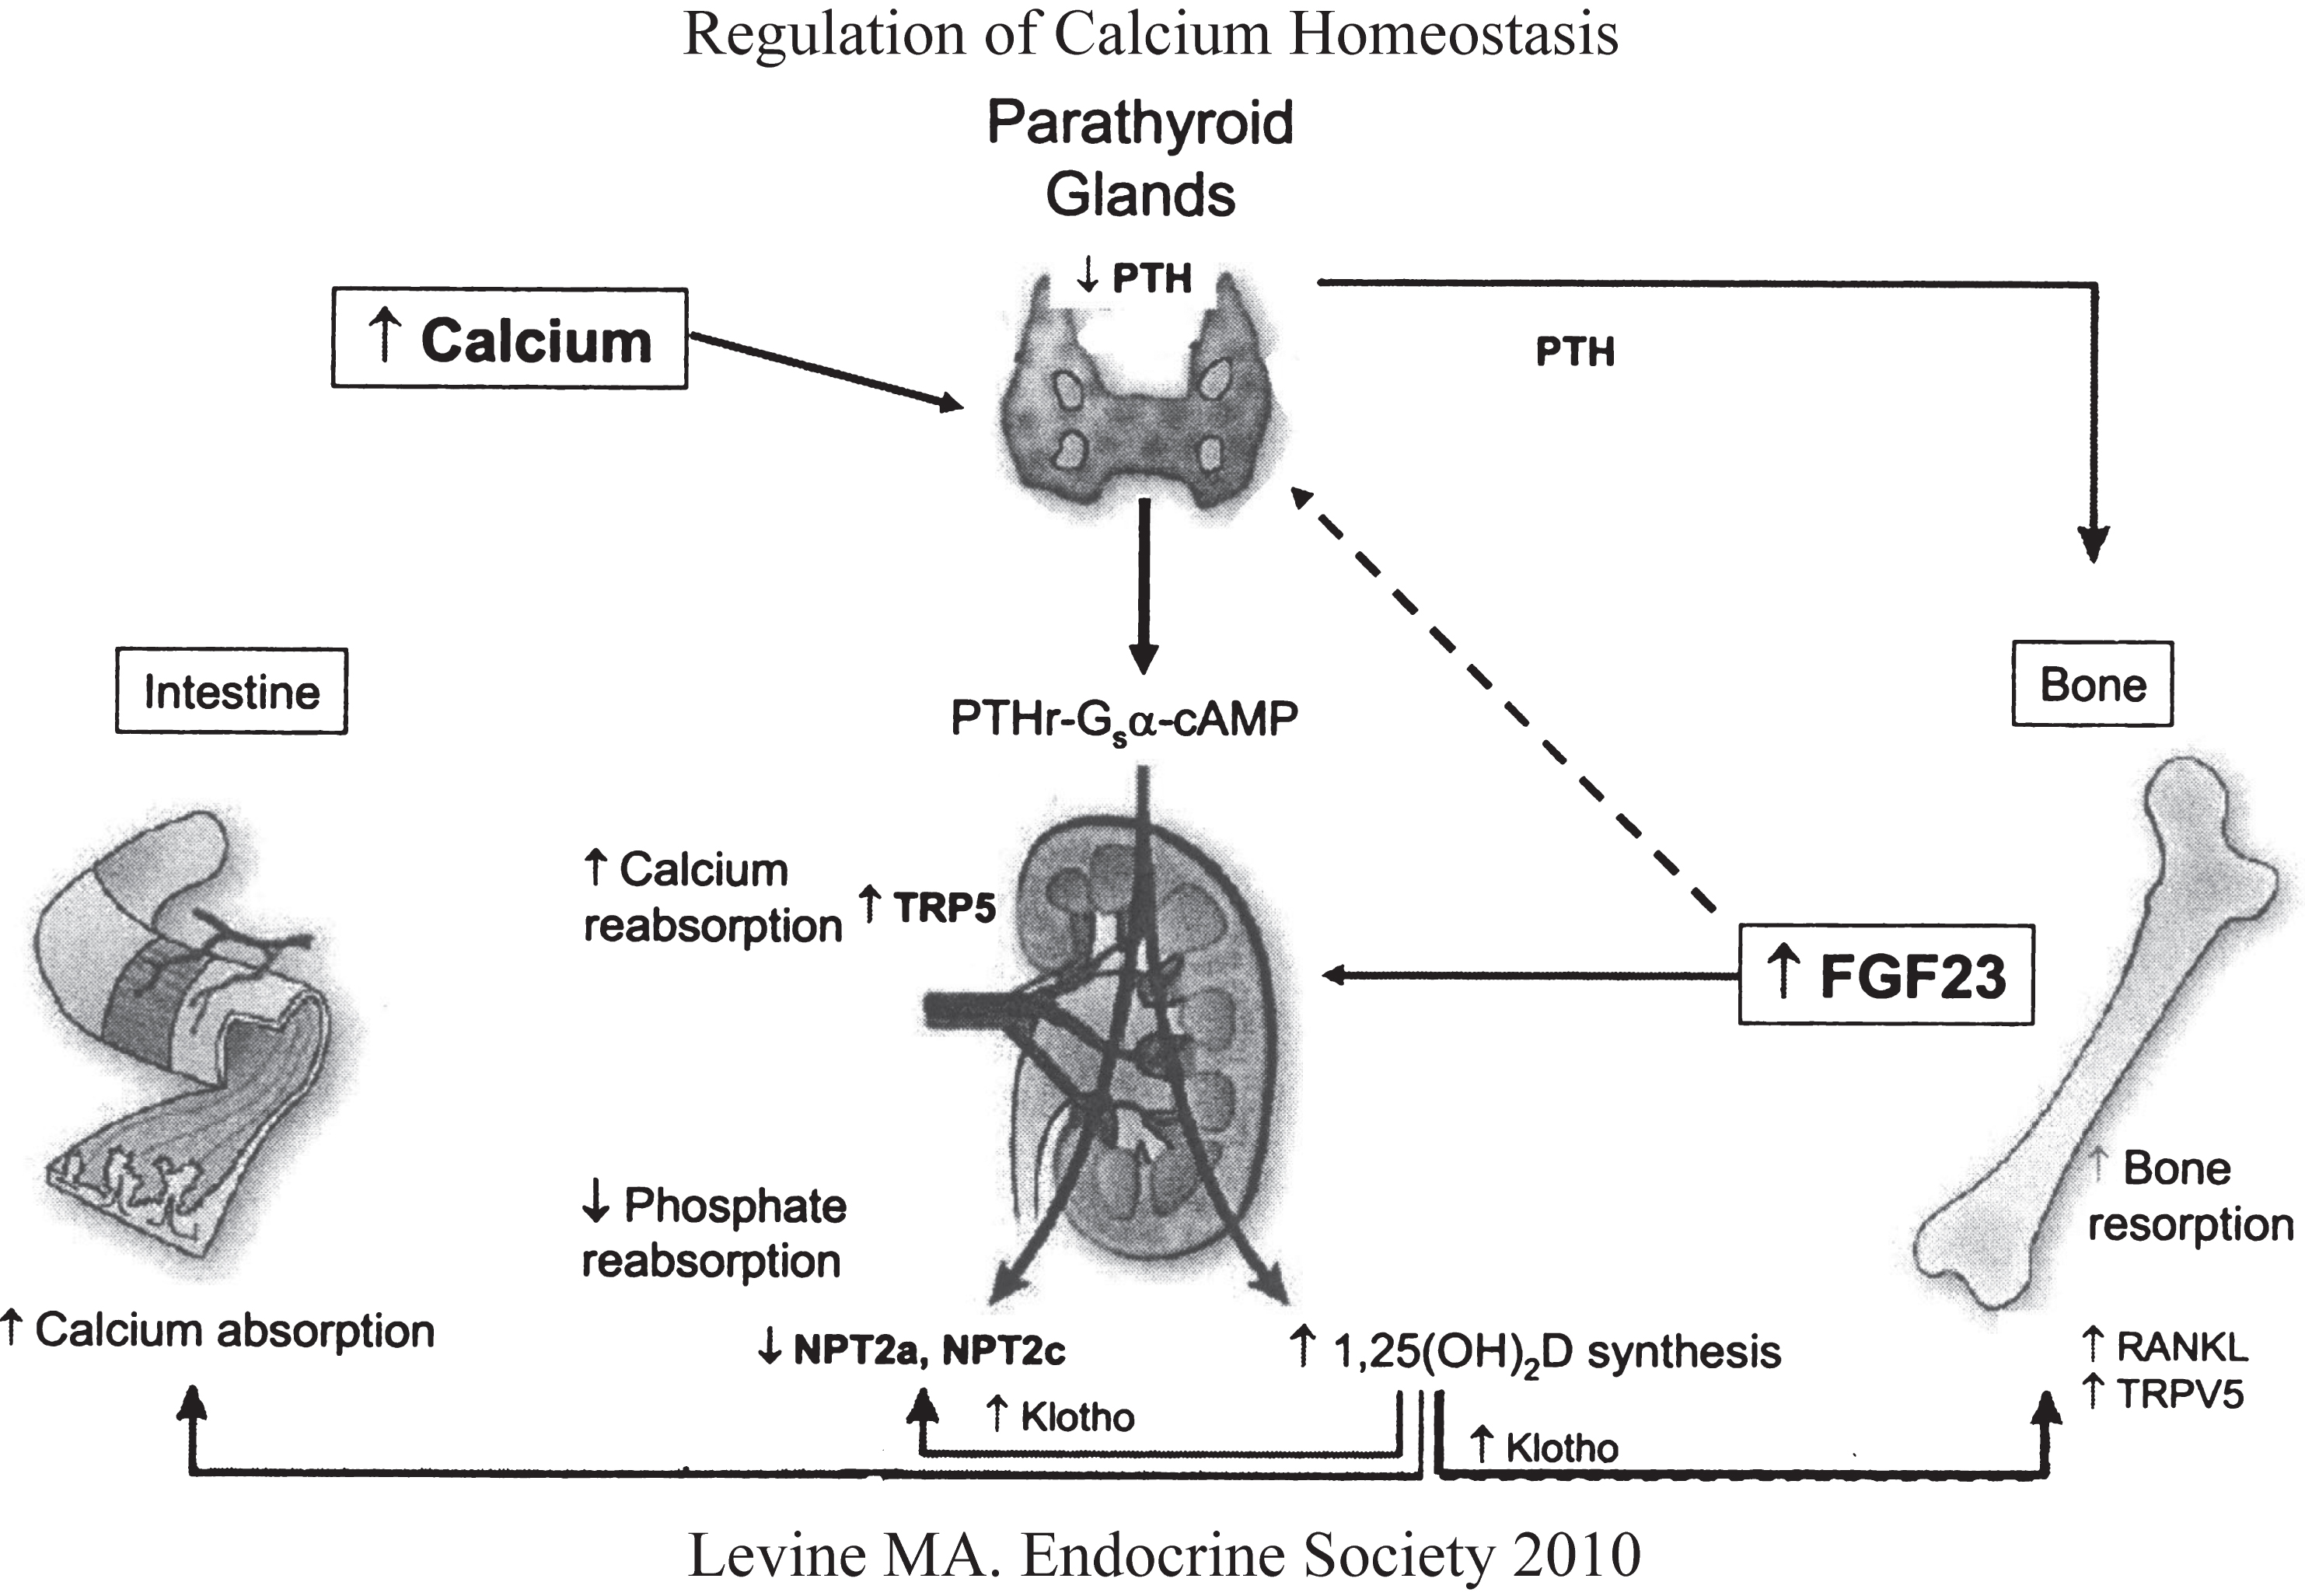 Regulation of calcium and phosphate homeostasis by the parathyroid glands, bone, kidney, and intestinal tract. Increase in serum Ca2+ stimulates secretion of PTH that acts upon the renal tubule (increases calcium reabsorption, decreases phosphate reabsorption, increases synthesis of calcitriol) and bone (stimulates osteoclastogenesis and reabsorption of skeletal calcium and phosphate. Increases in serum phosphate levels stimulates skeletal production of FGF23 (depresses renal tubular reabsorption of phosphate and synthesis of calcitriol). (Reproduced with permission from Levine MA. Investigation and management of hypocalcemia. Meet-the-Professor. Meeting of the Endocrine Society, 2010, p 81-86.)